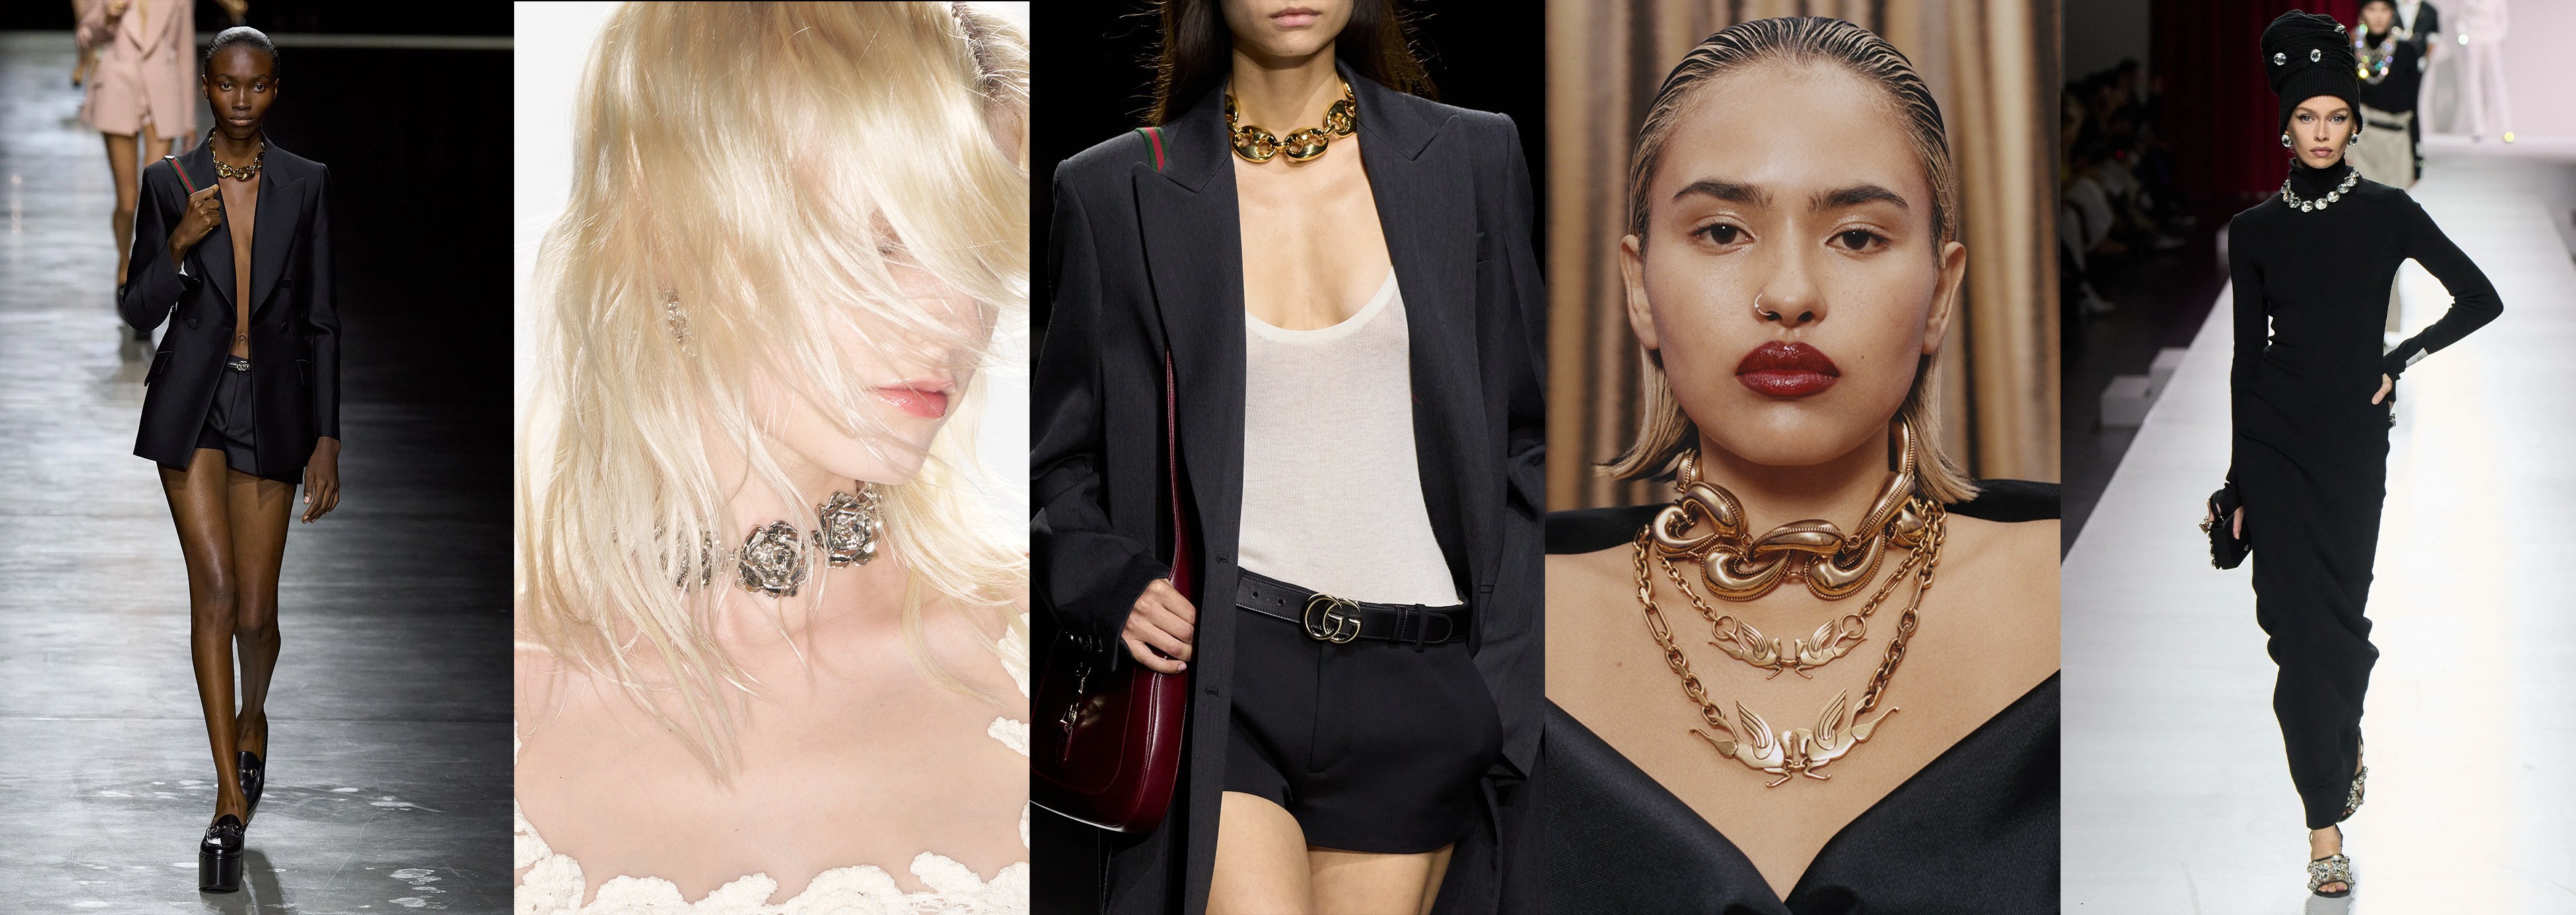 Choker Trend is Now: the New Summer Look